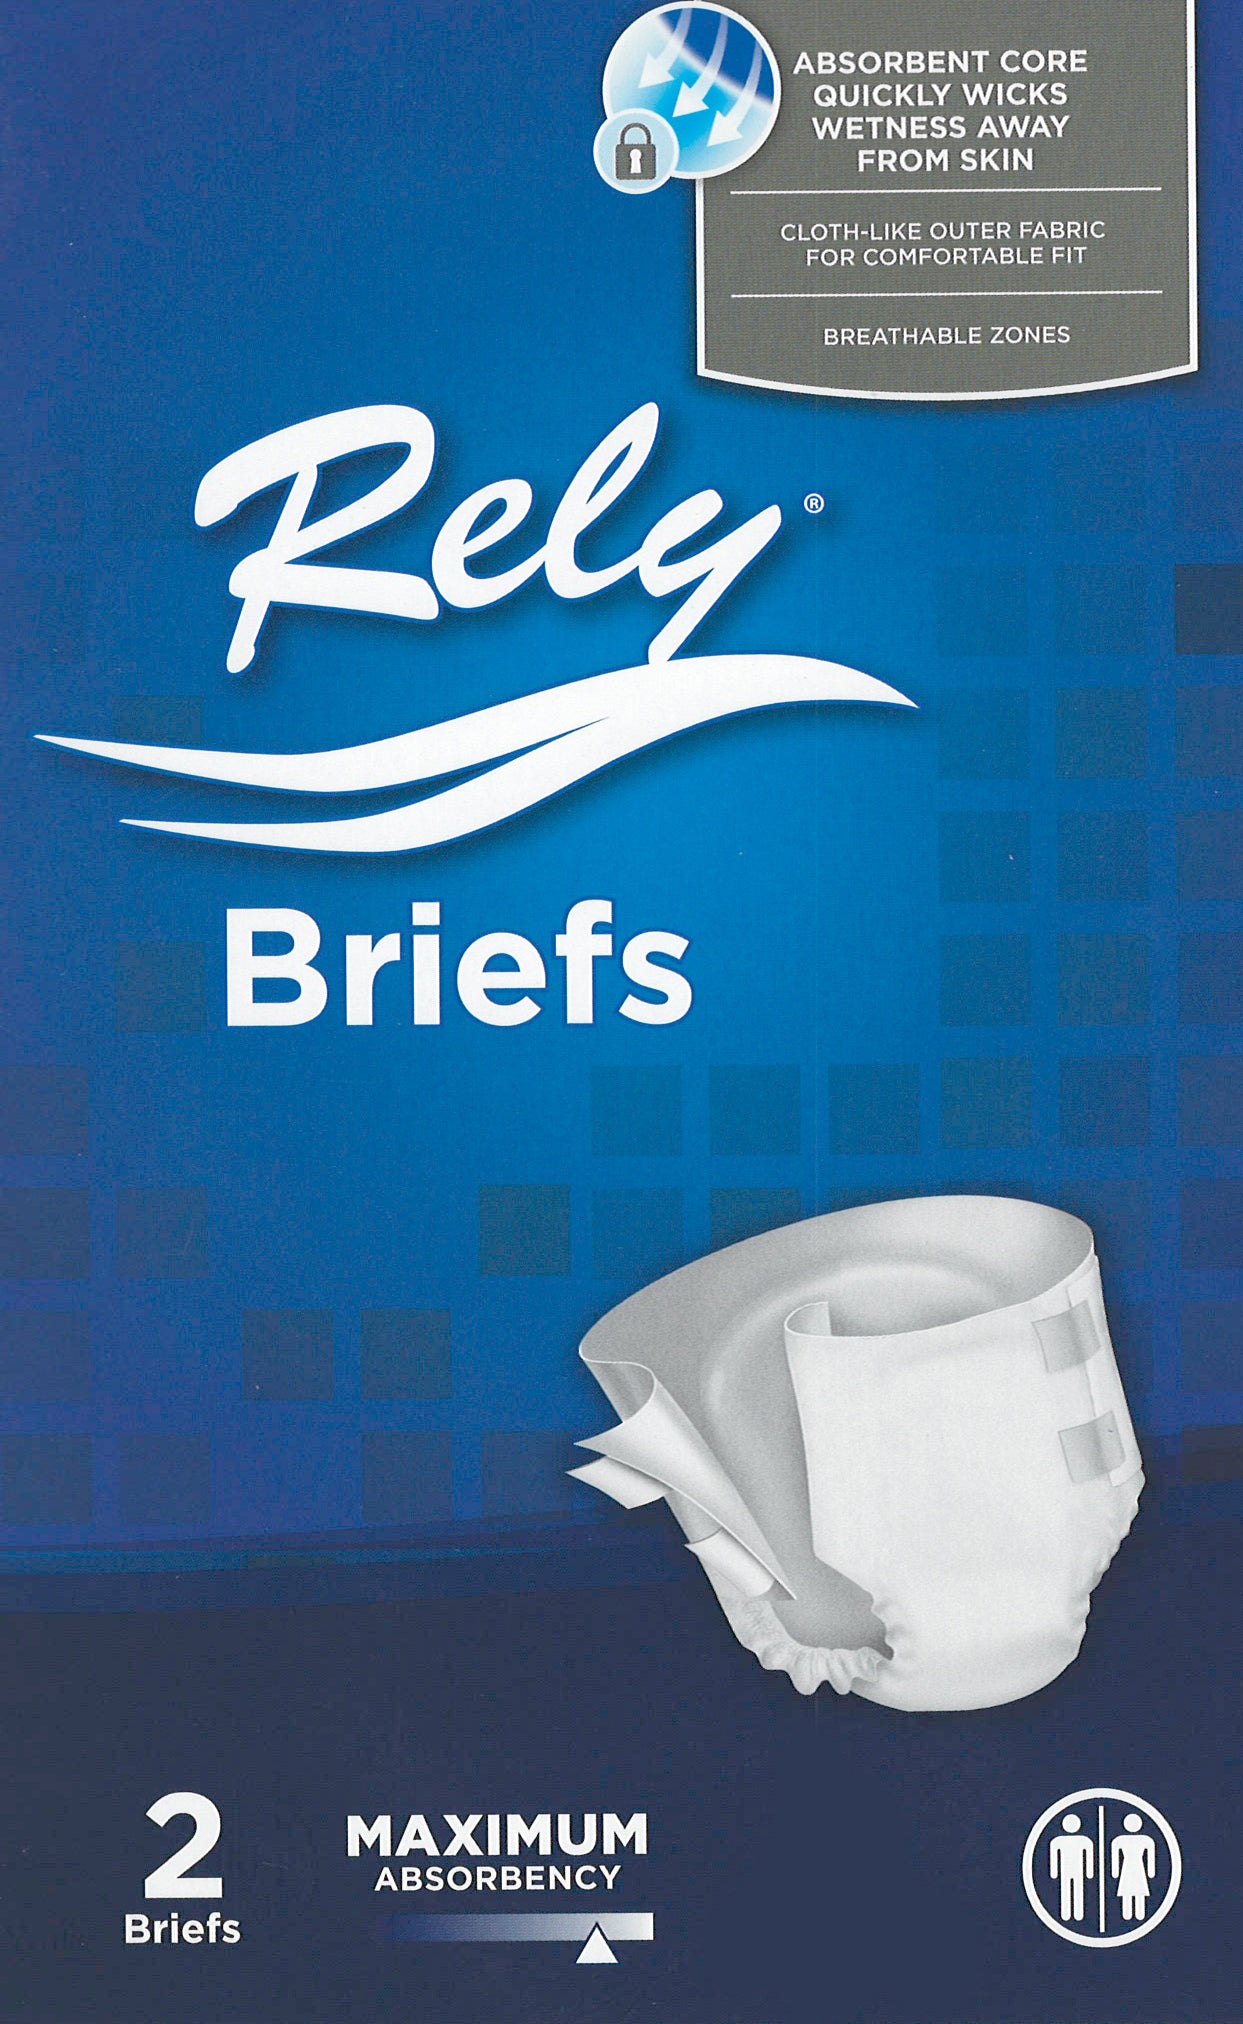 Rely Briefs/Diapers Sample Pack